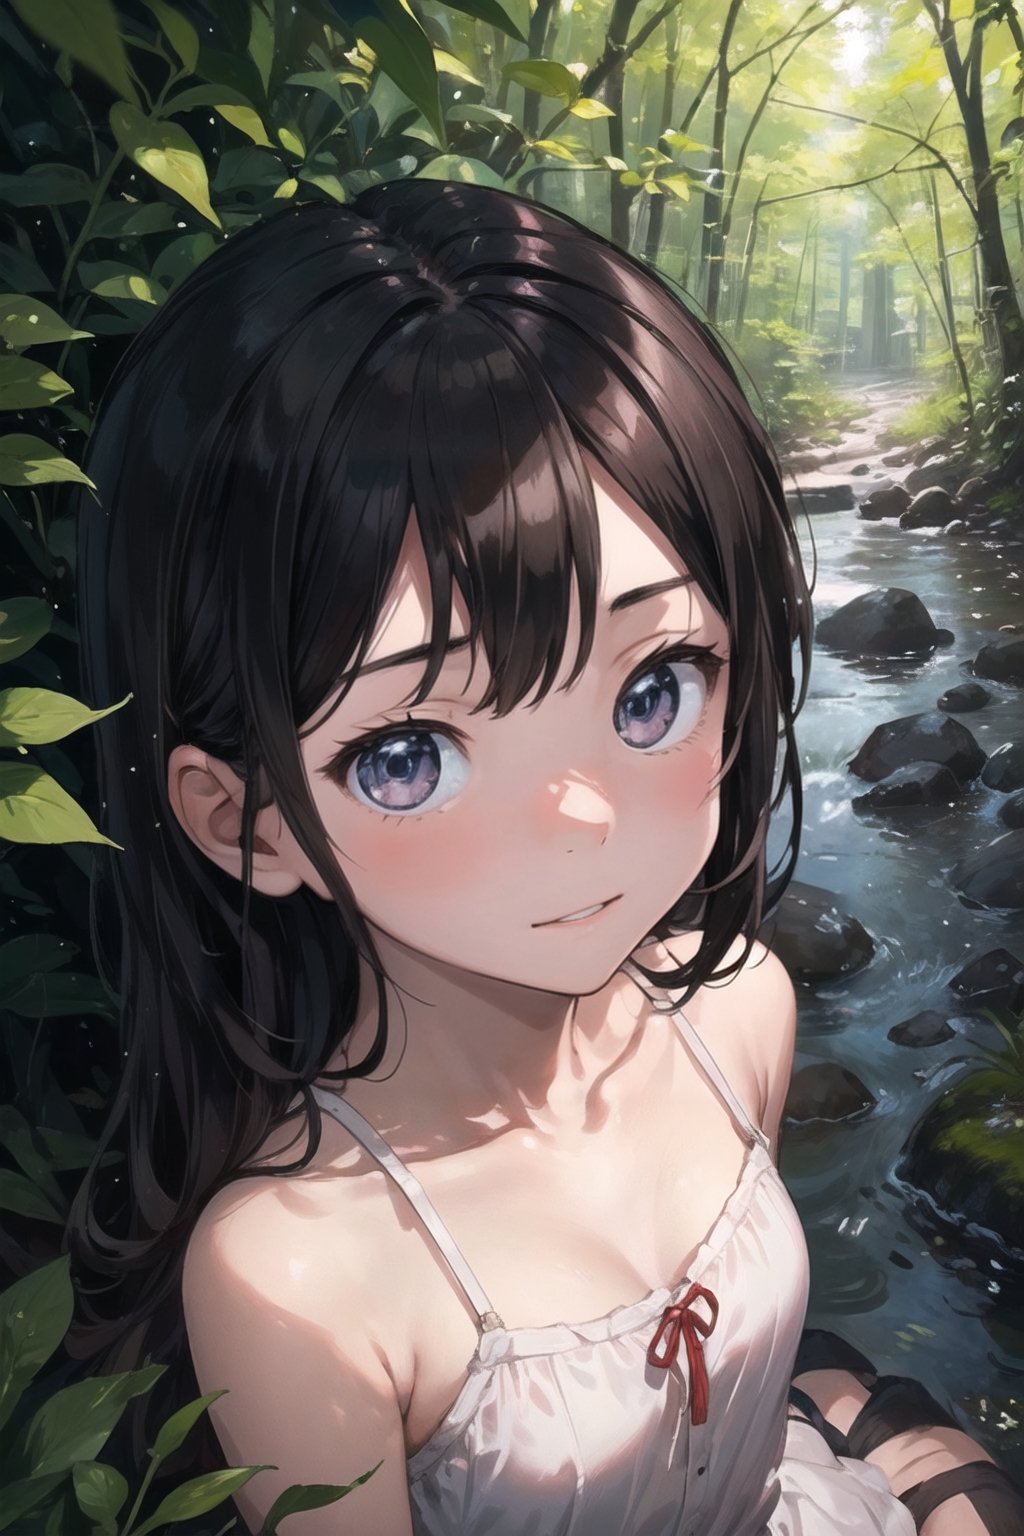 (((By the creek deep in the woods))),(looking at the audience),(((Only the face enters the camera))),
人：a korean little daughter,(((Pure and restrained little daughter))),
服：(sleeveless spaghetti straps),